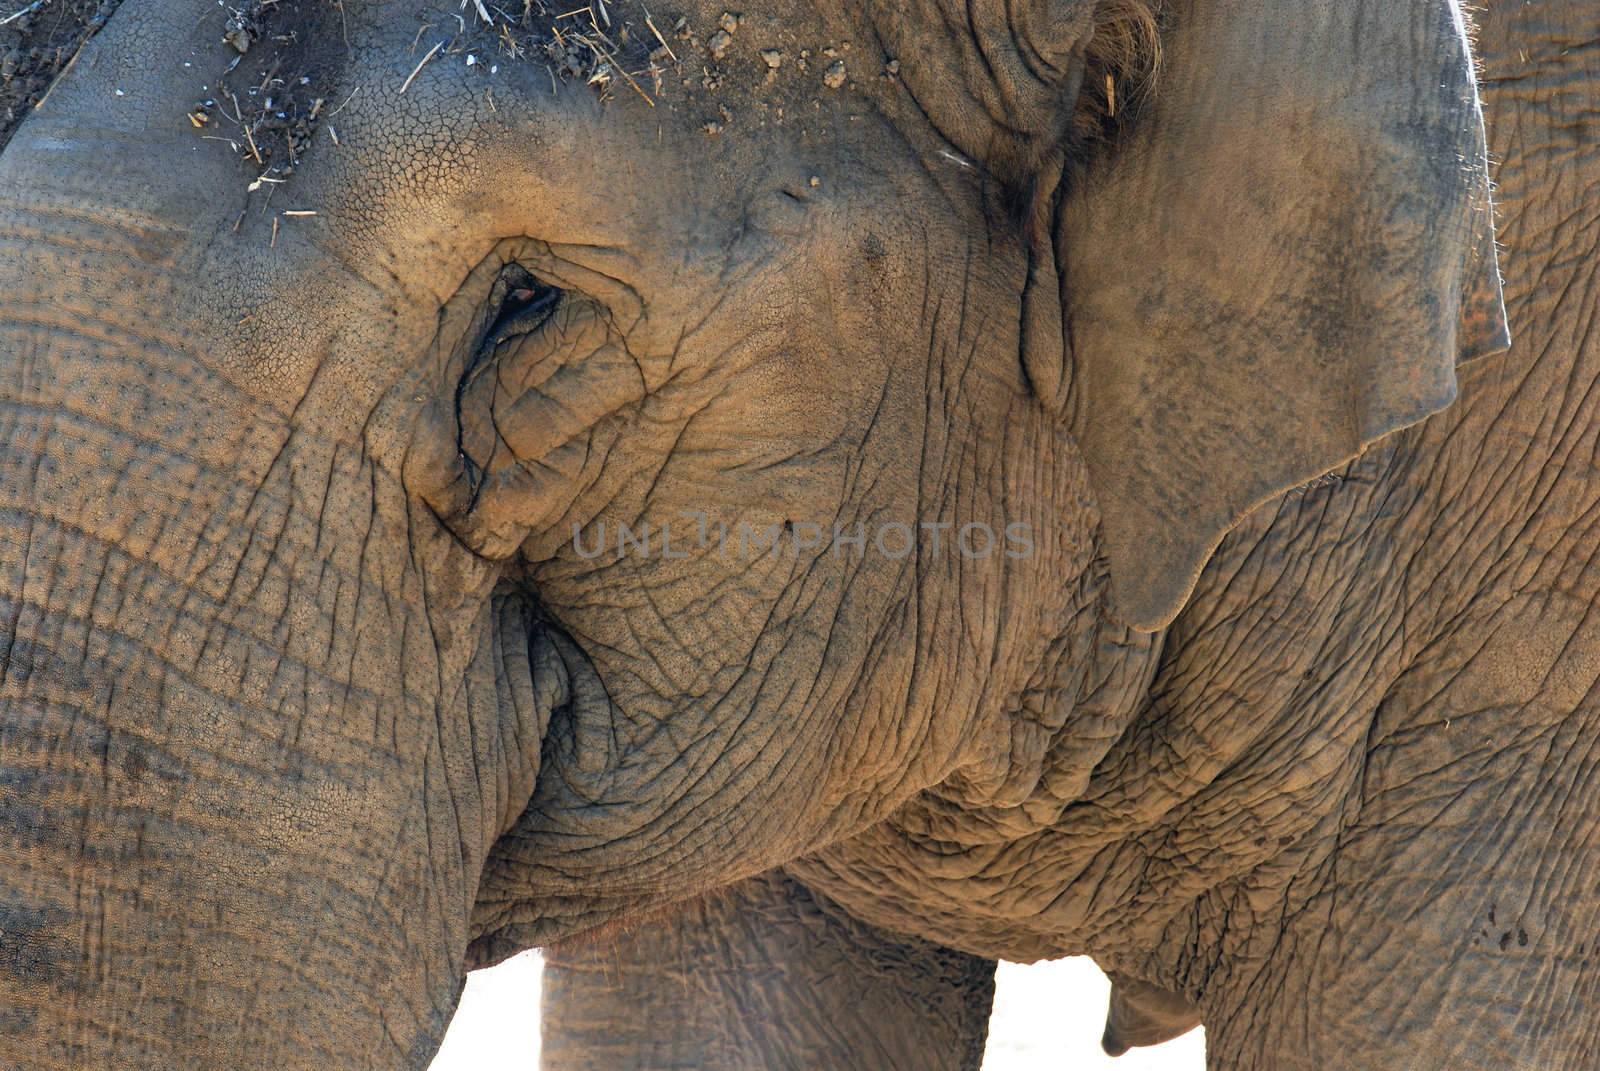 Elephant close up. Portrait of its face. Wrinkled skin texture. White background
